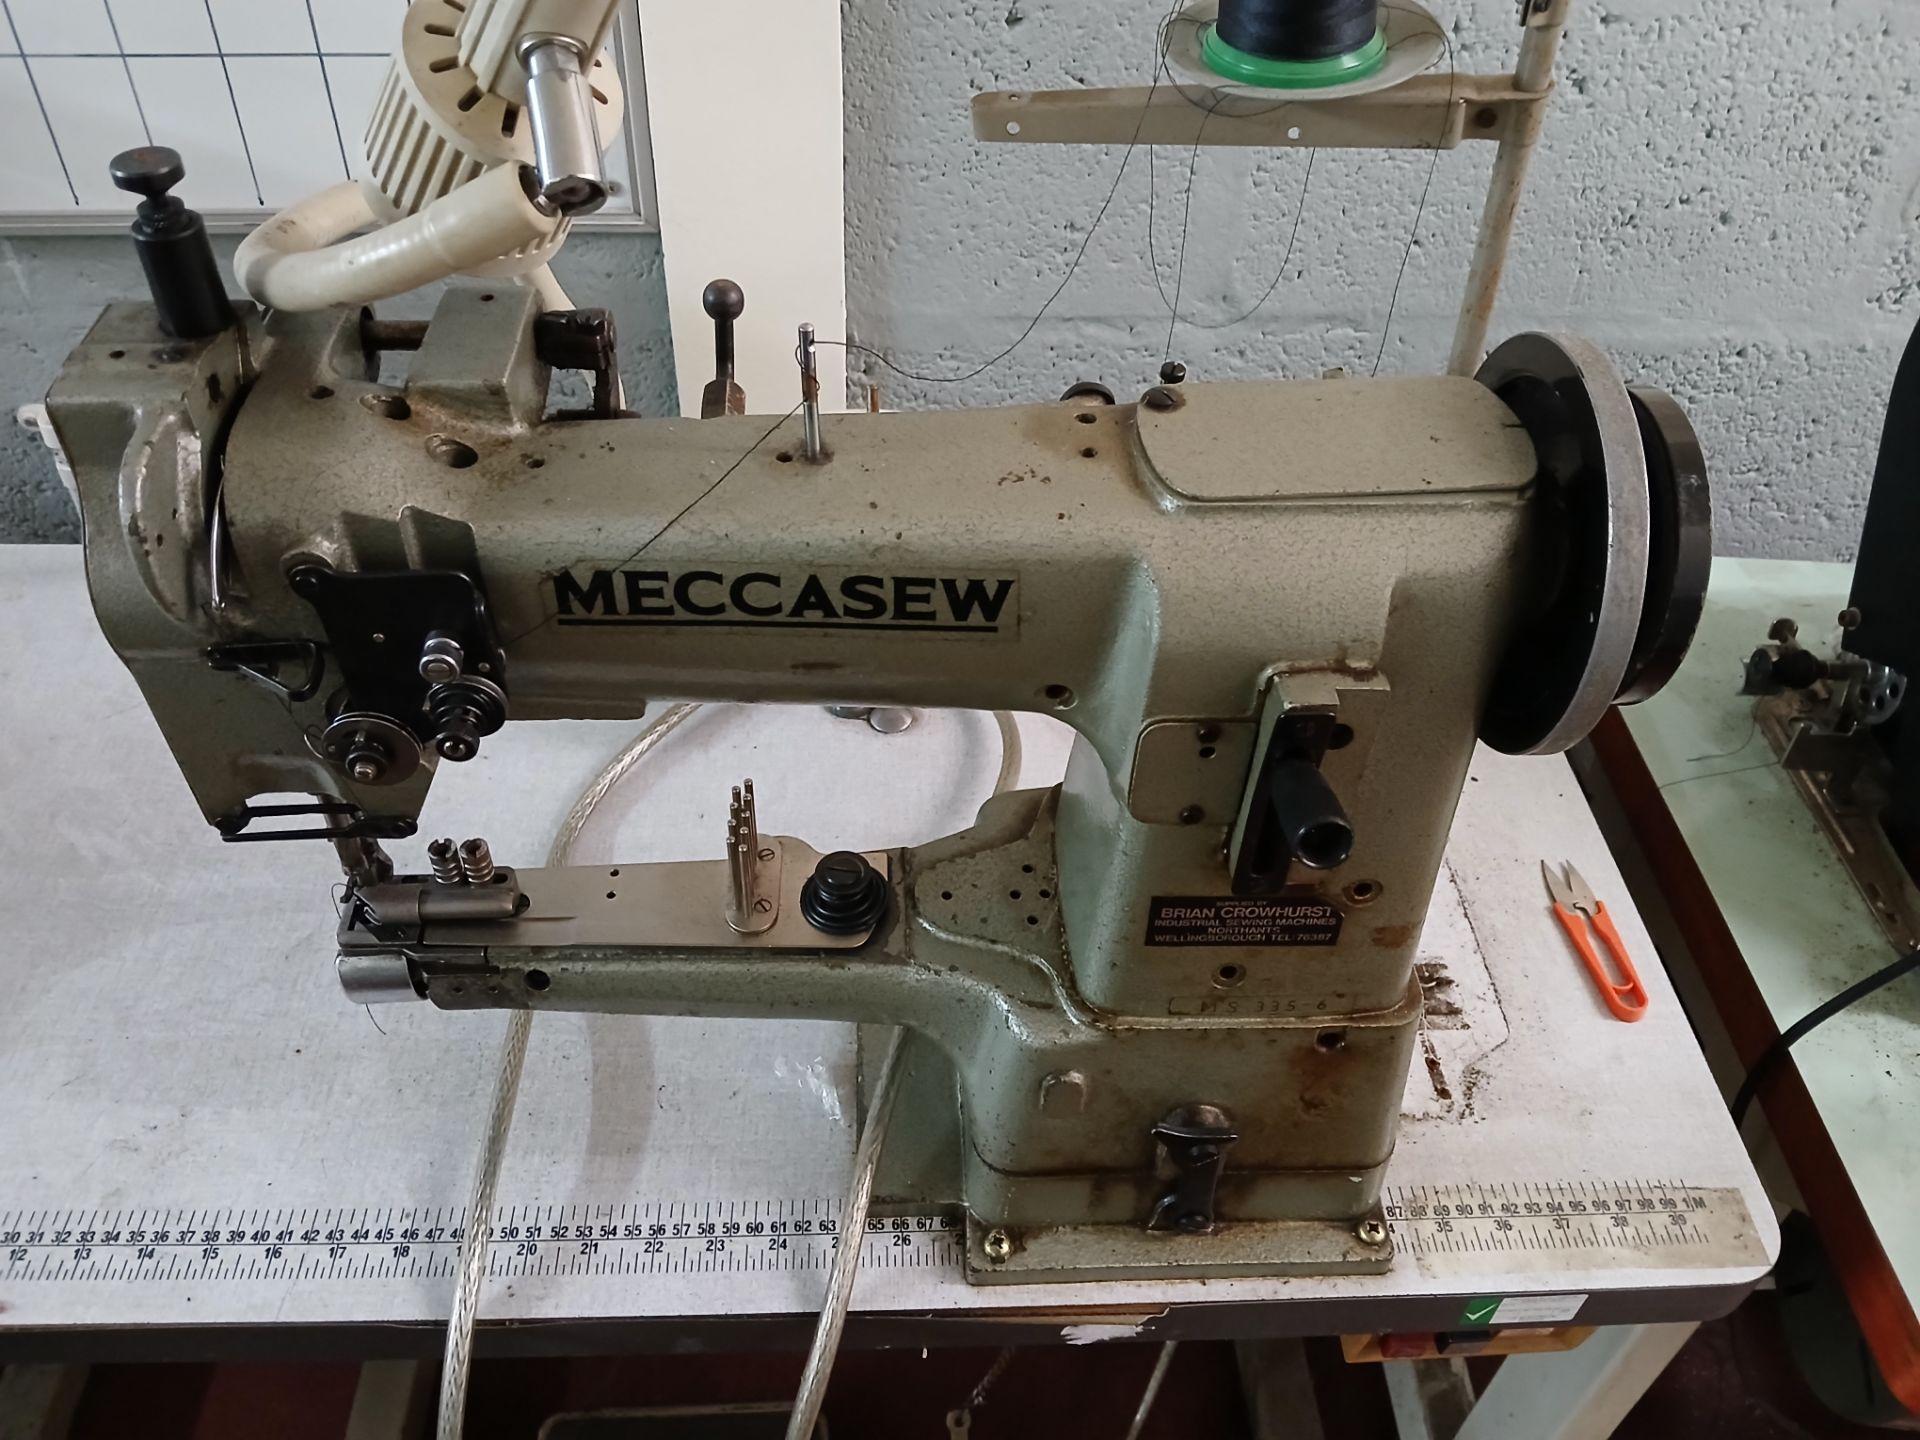 Meccasew walking foot cylinder sewing machine 240v - Image 2 of 3